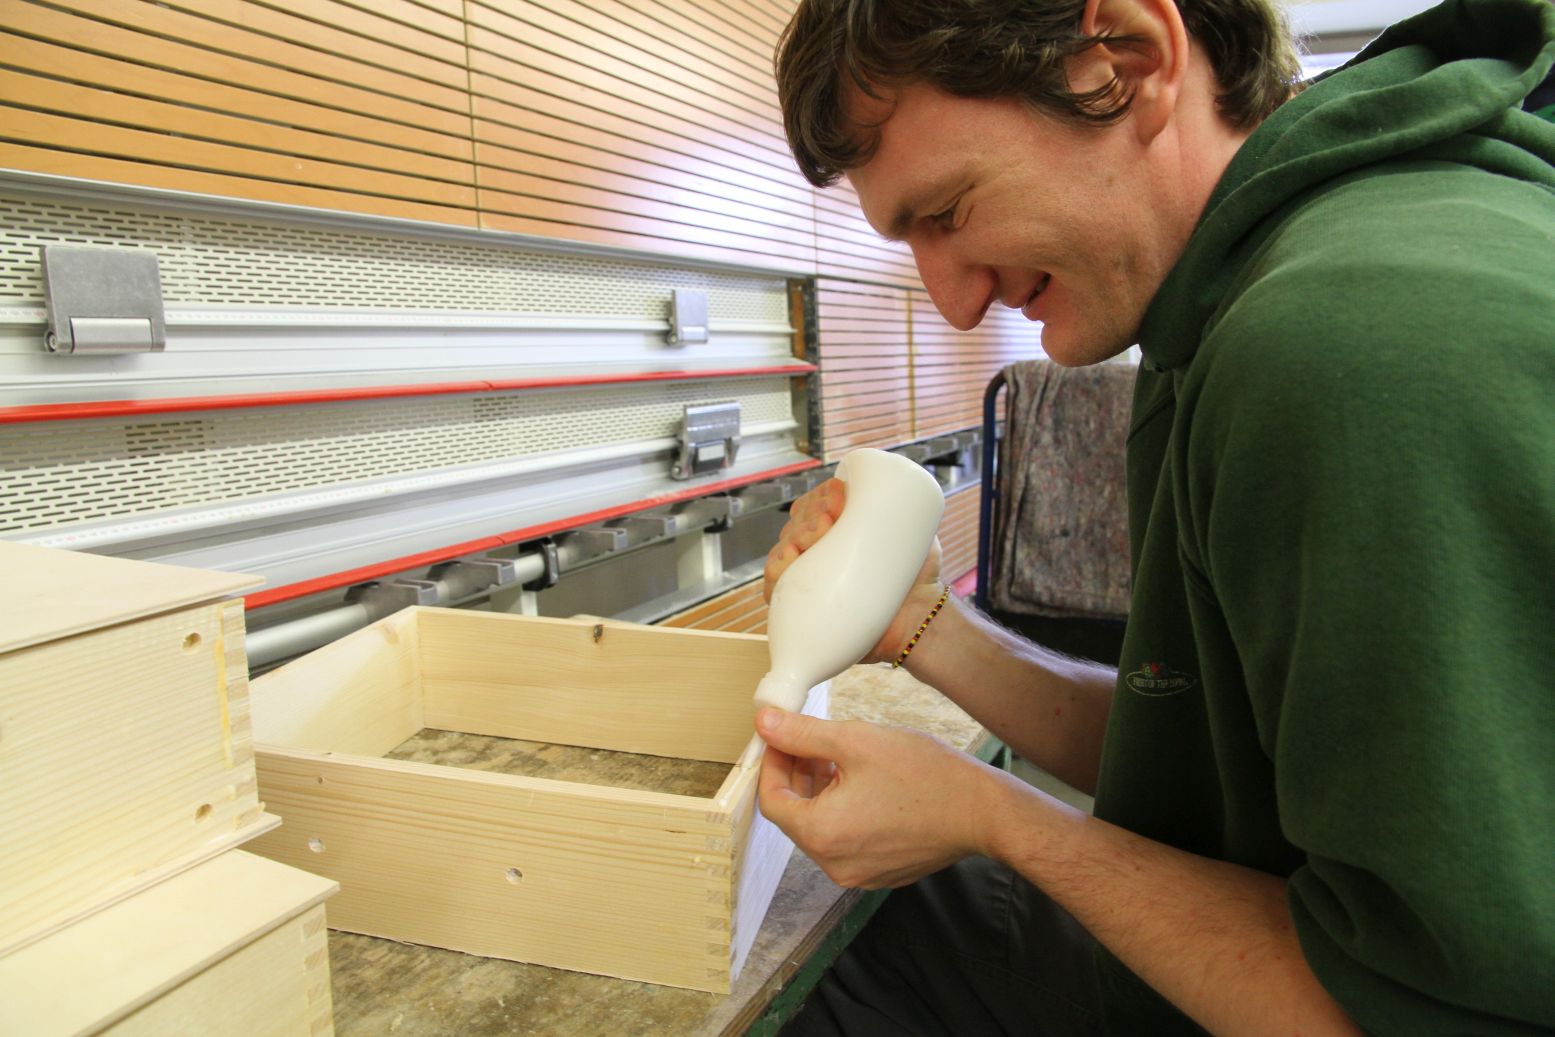 A man at a workshop for skilled workers with disabilities glues a wood box for Metalog's collection of sustainable training tools